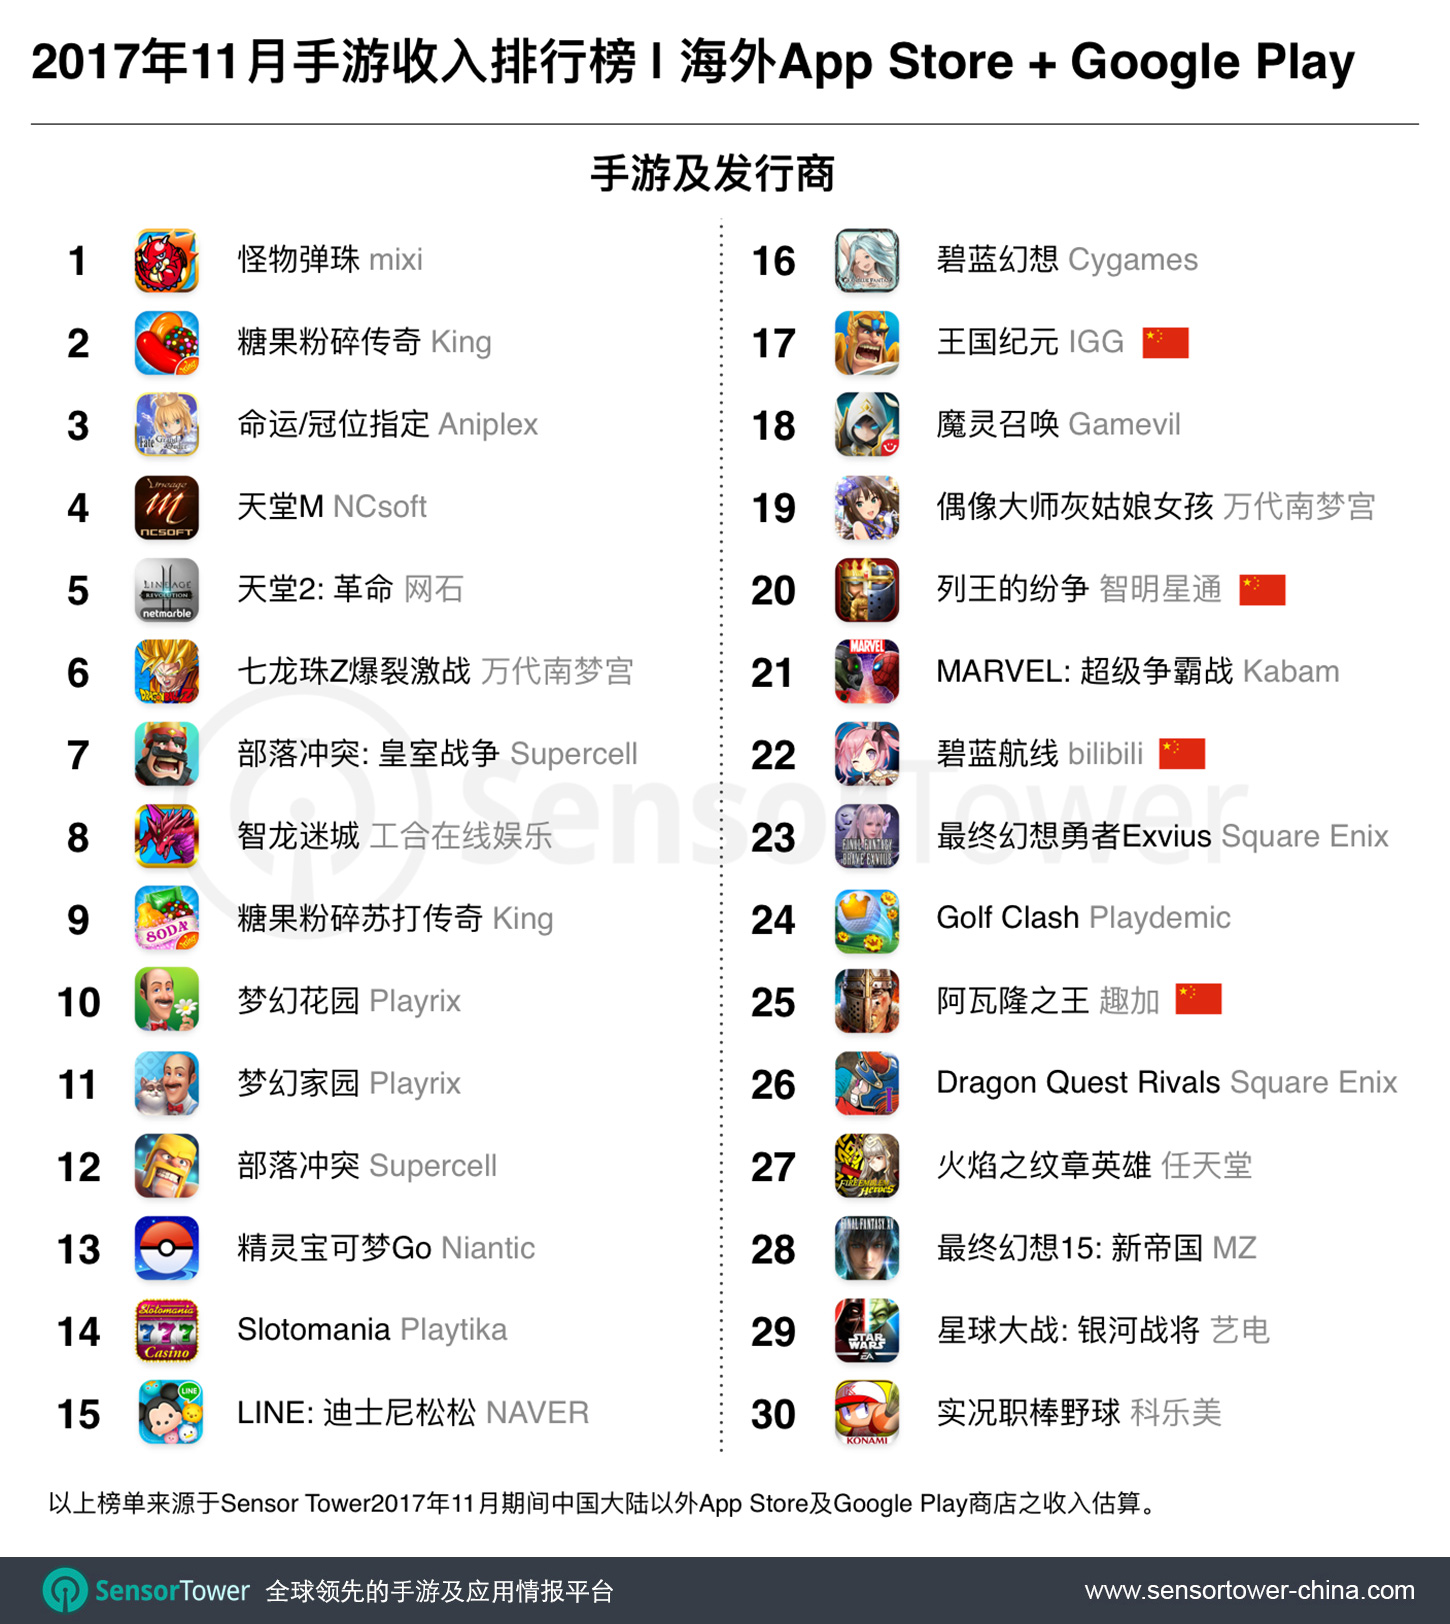 Nov 2017 Top 30 Grossing Games Outside China